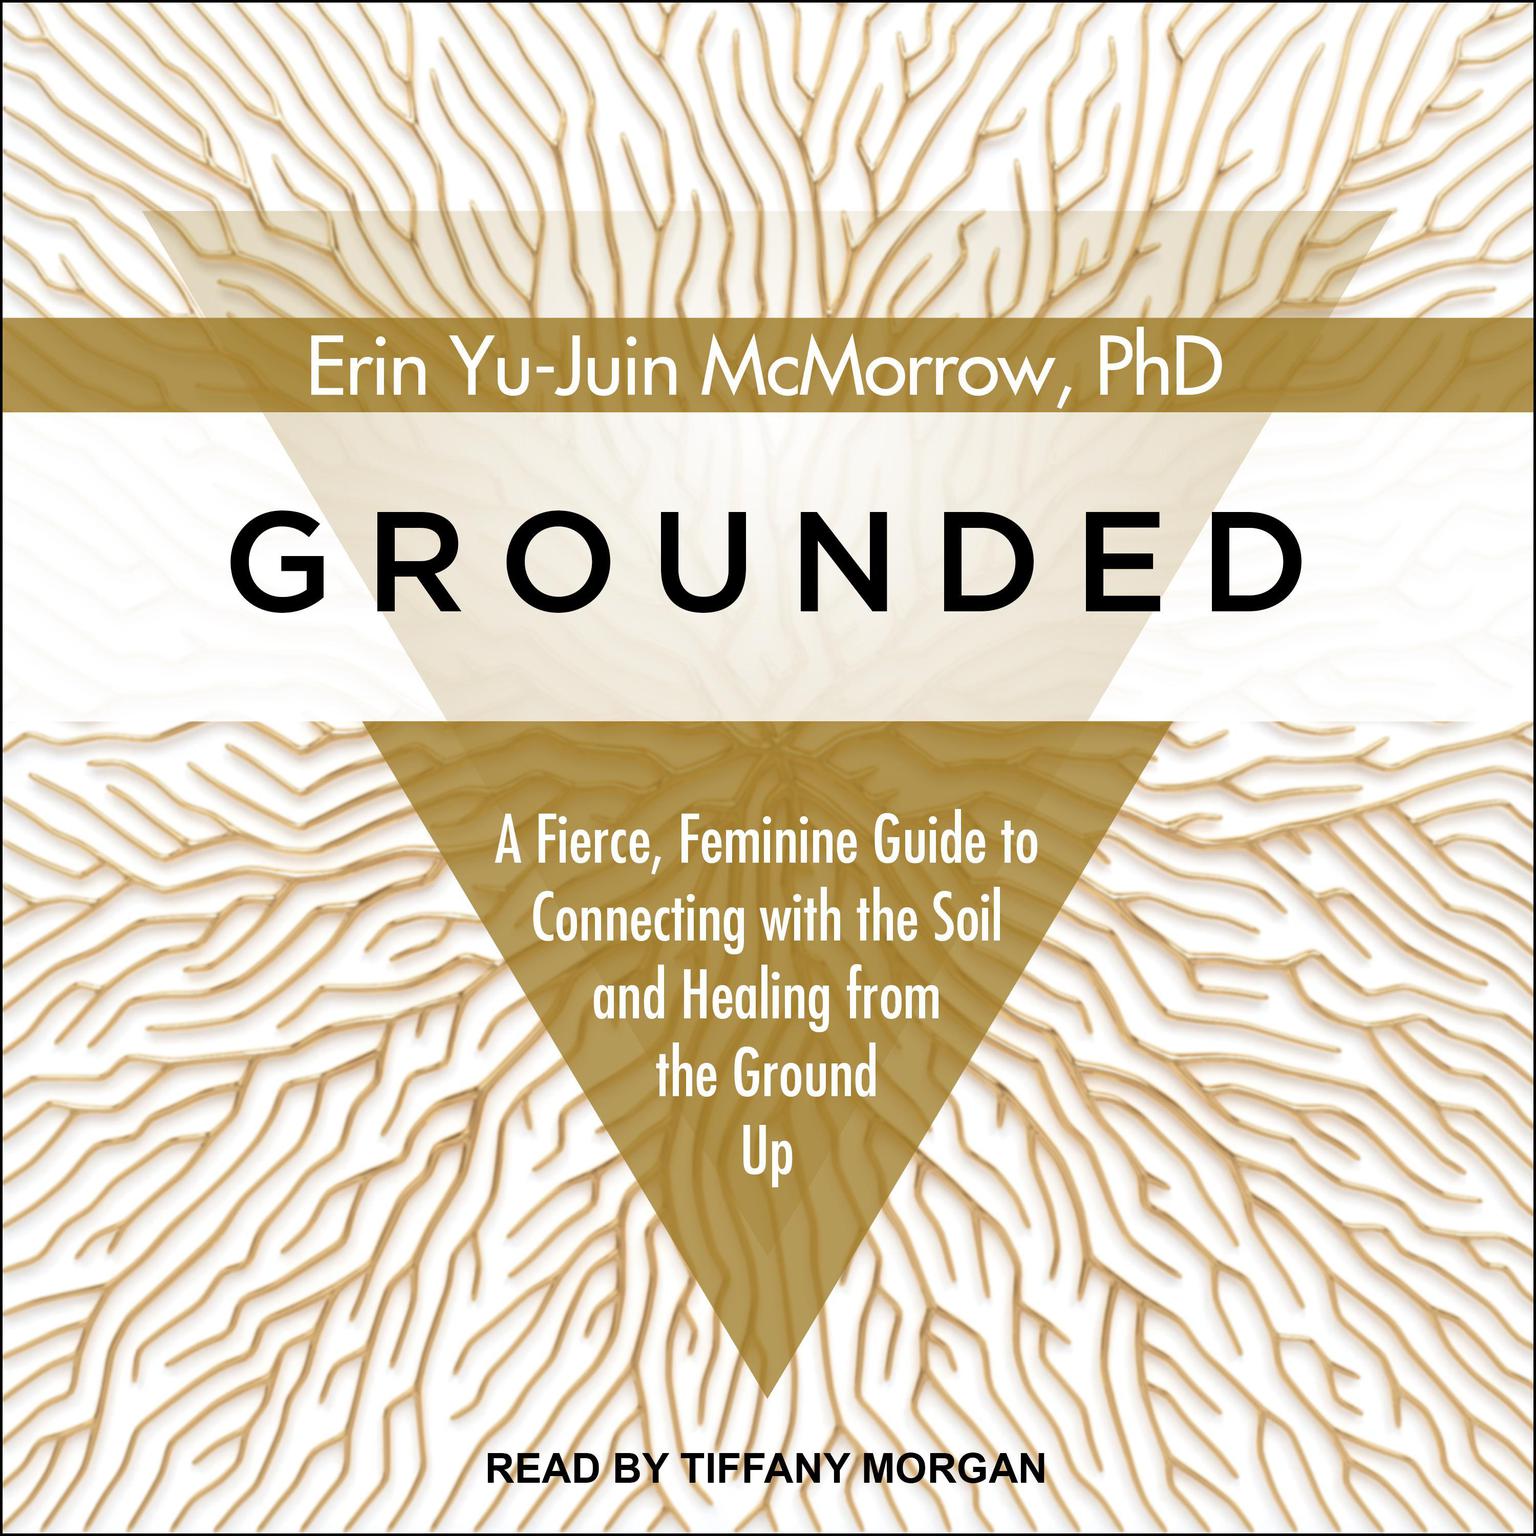 Grounded: A Fierce, Feminine Guide to Connecting to the Soil and Healing from the Ground Up Audiobook, by Erin Yu-Juin McMorrow